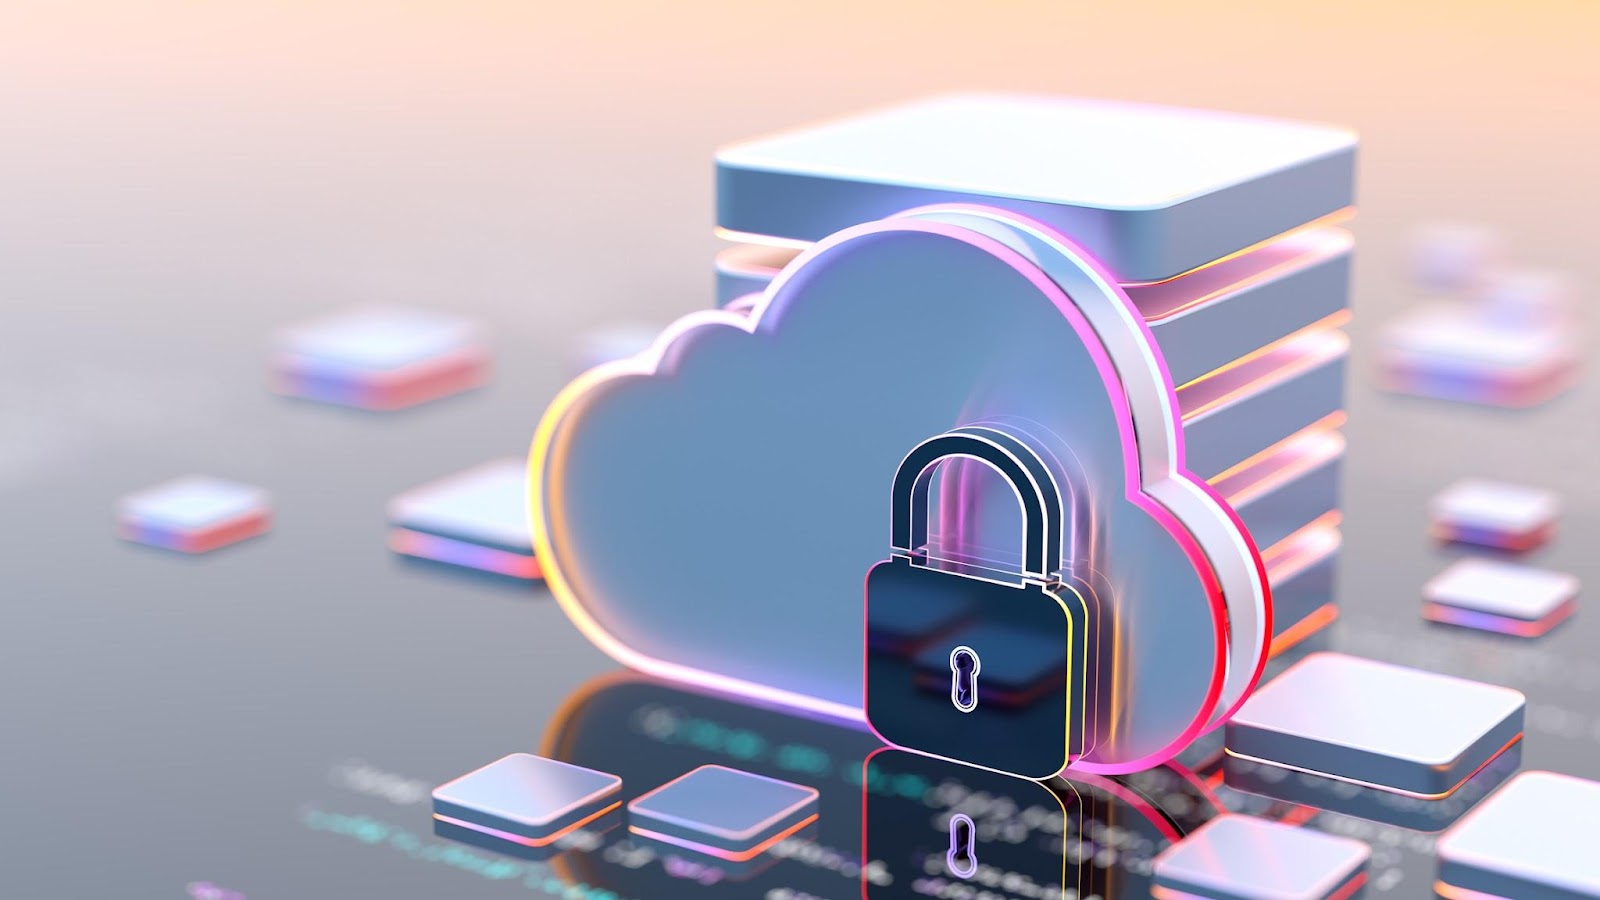 Protecting data and applications in cloud computing environments from cyber threats